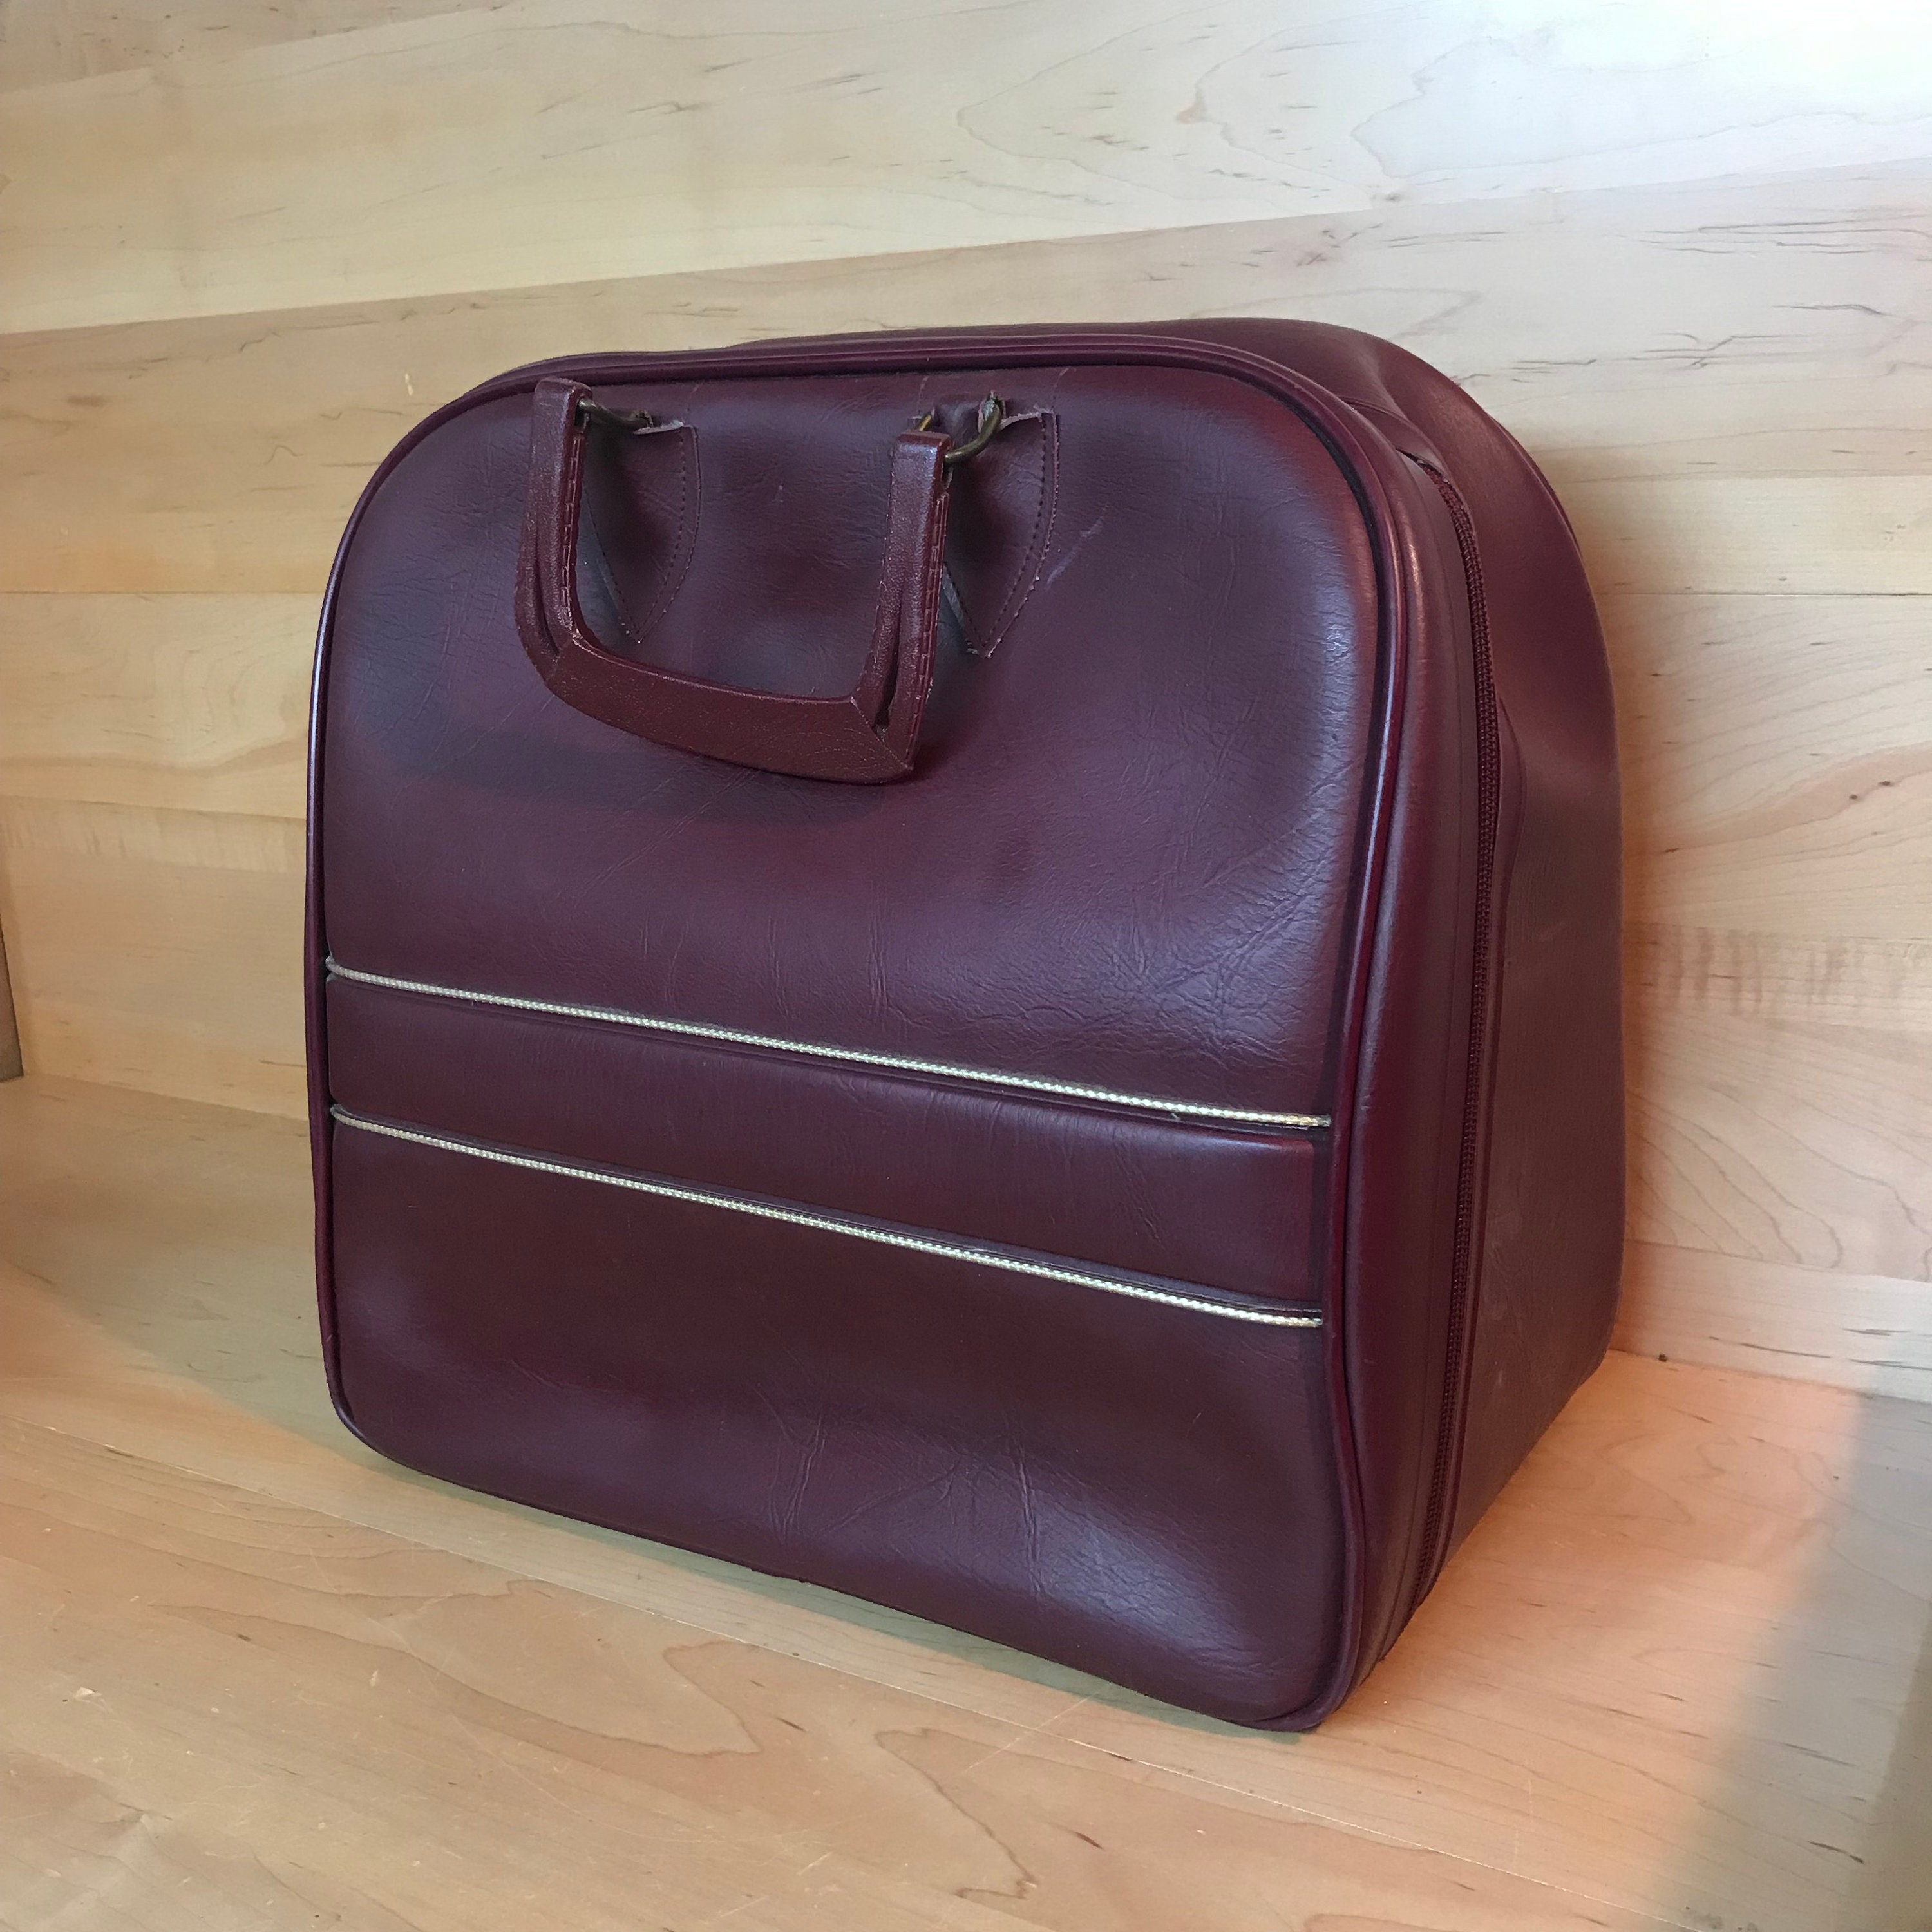 VINTAGE BAGS 1960s - SELECTION OLYMPIQUE LOGO 23 - BOWLING BAG